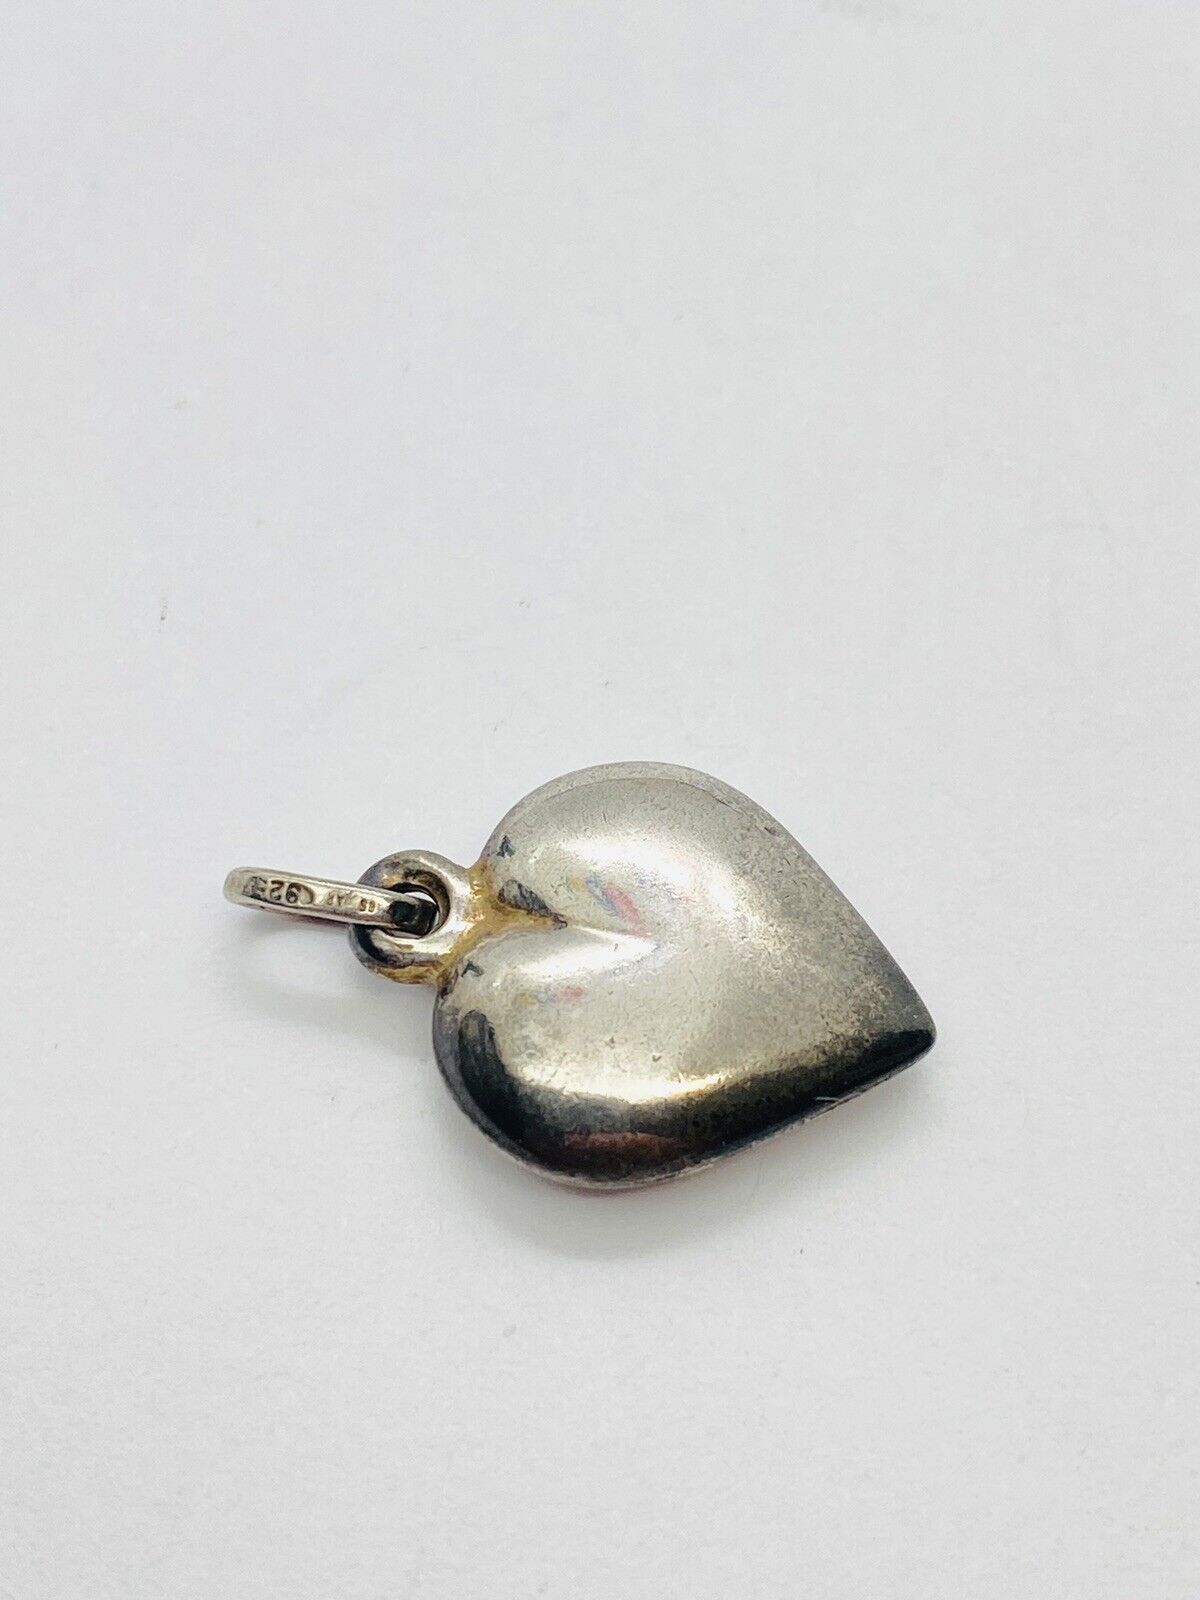 1.9g 925 ANTIQUE PUFFY STERLING SILVER HEART STAMPED FINE JEWELRY